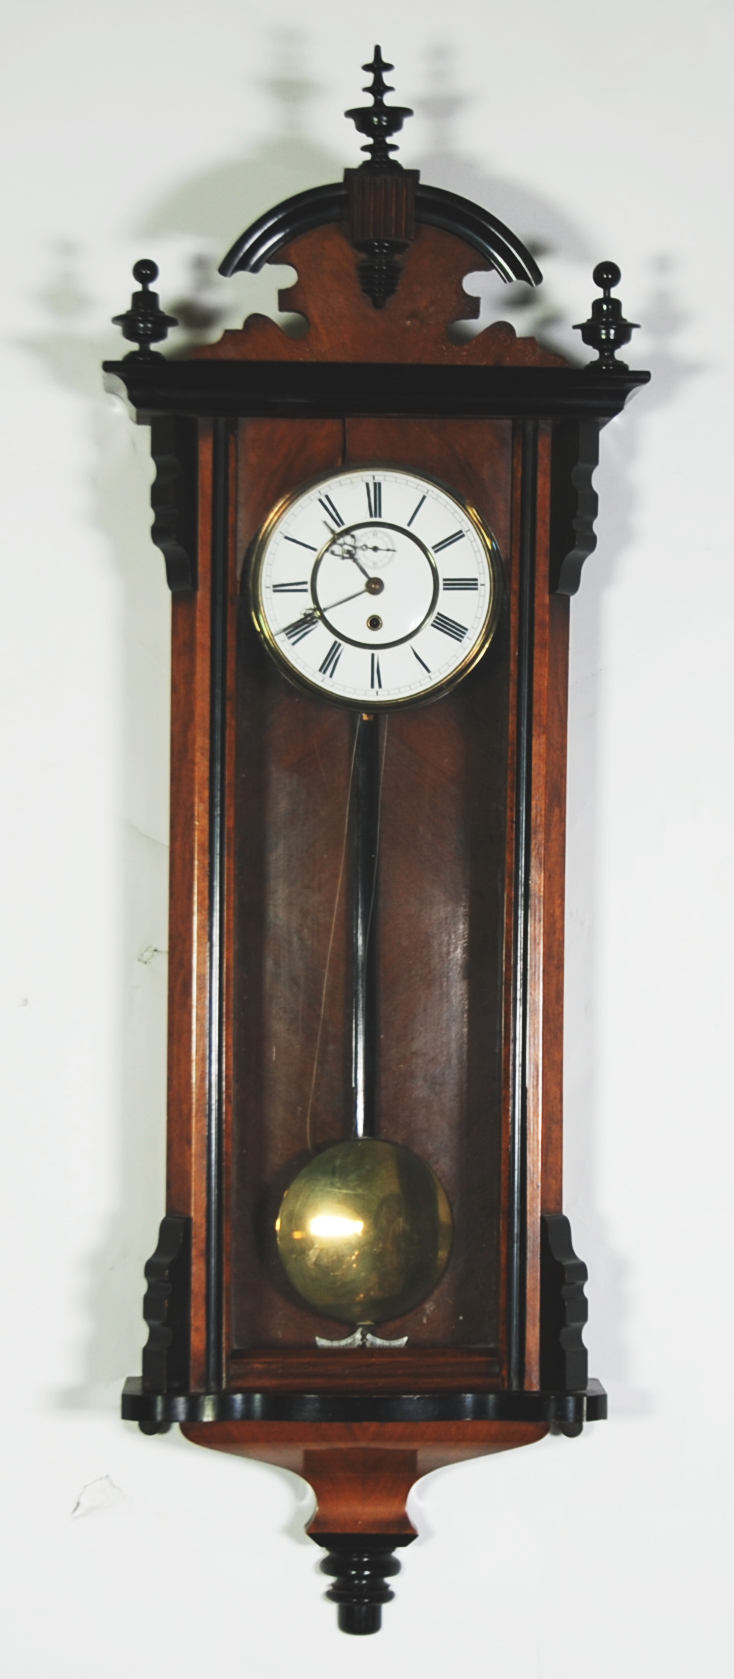 LATE 19th CENTURY VIENNA STYLE WALL CLOCK IN A WALNUT AND PARTLY EBONISED CASE, having a single